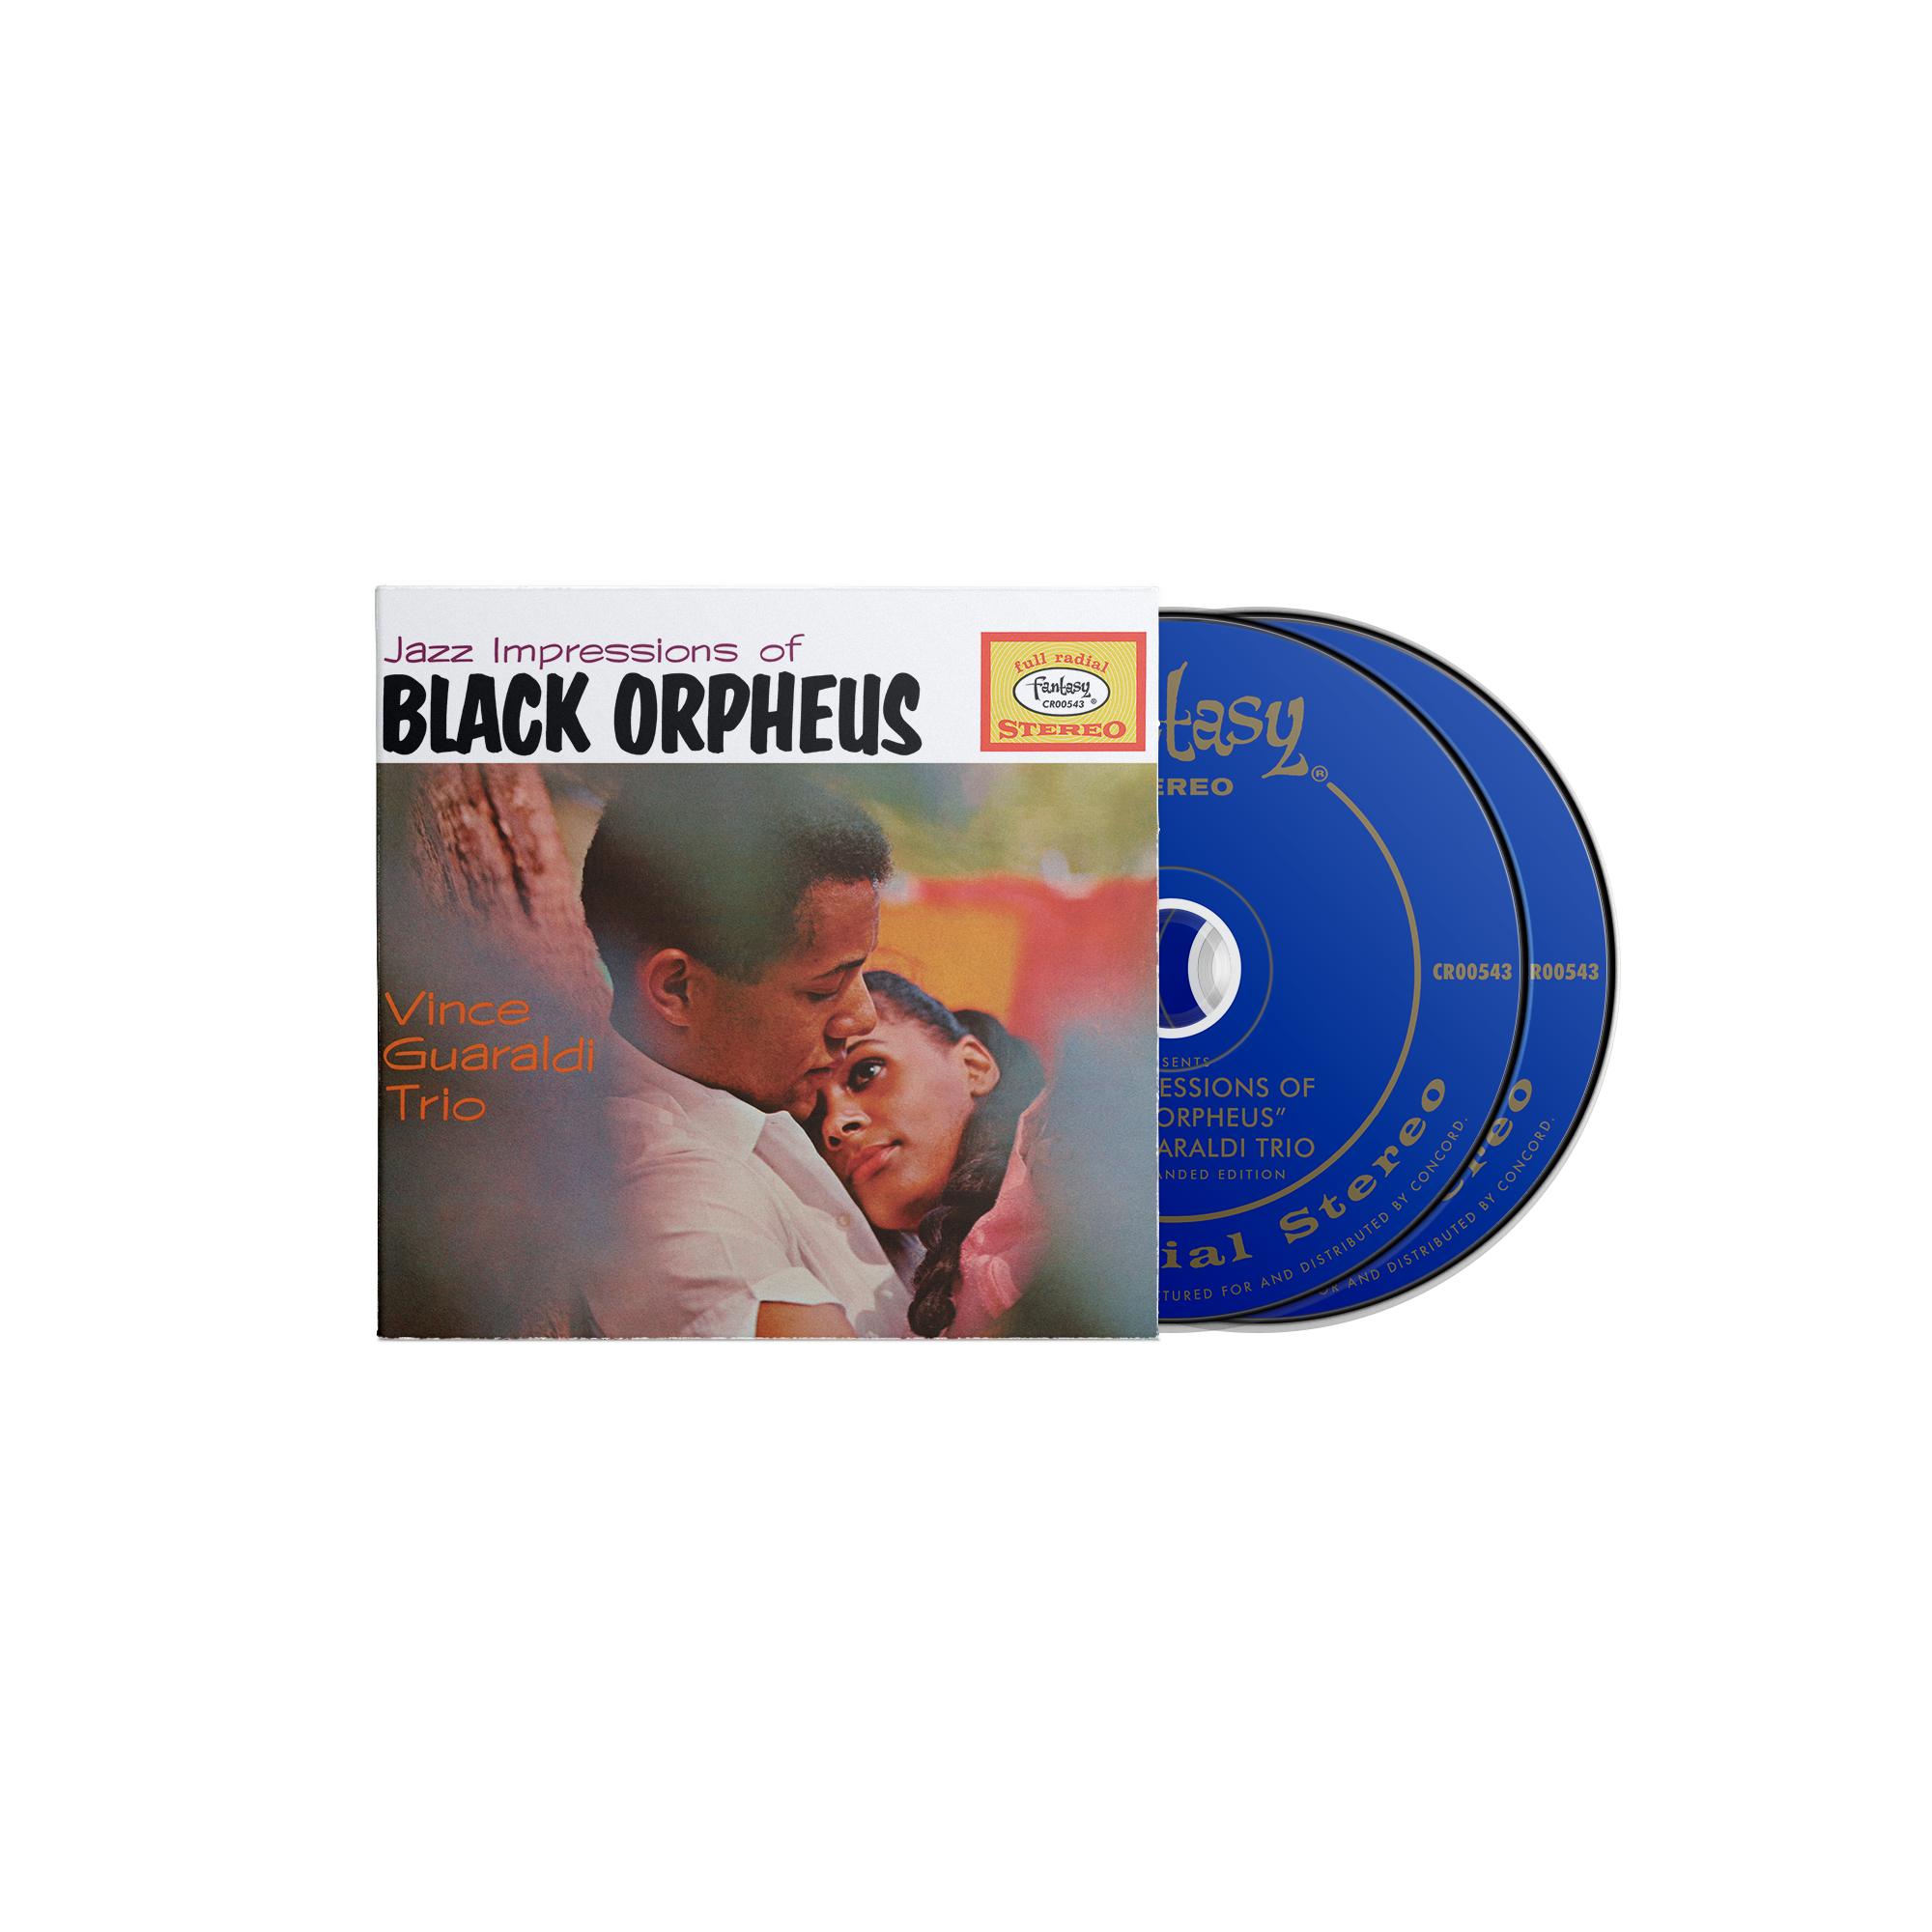 Jazz Impressions Of Black Orpheus: Deluxe Edition (2-CD)